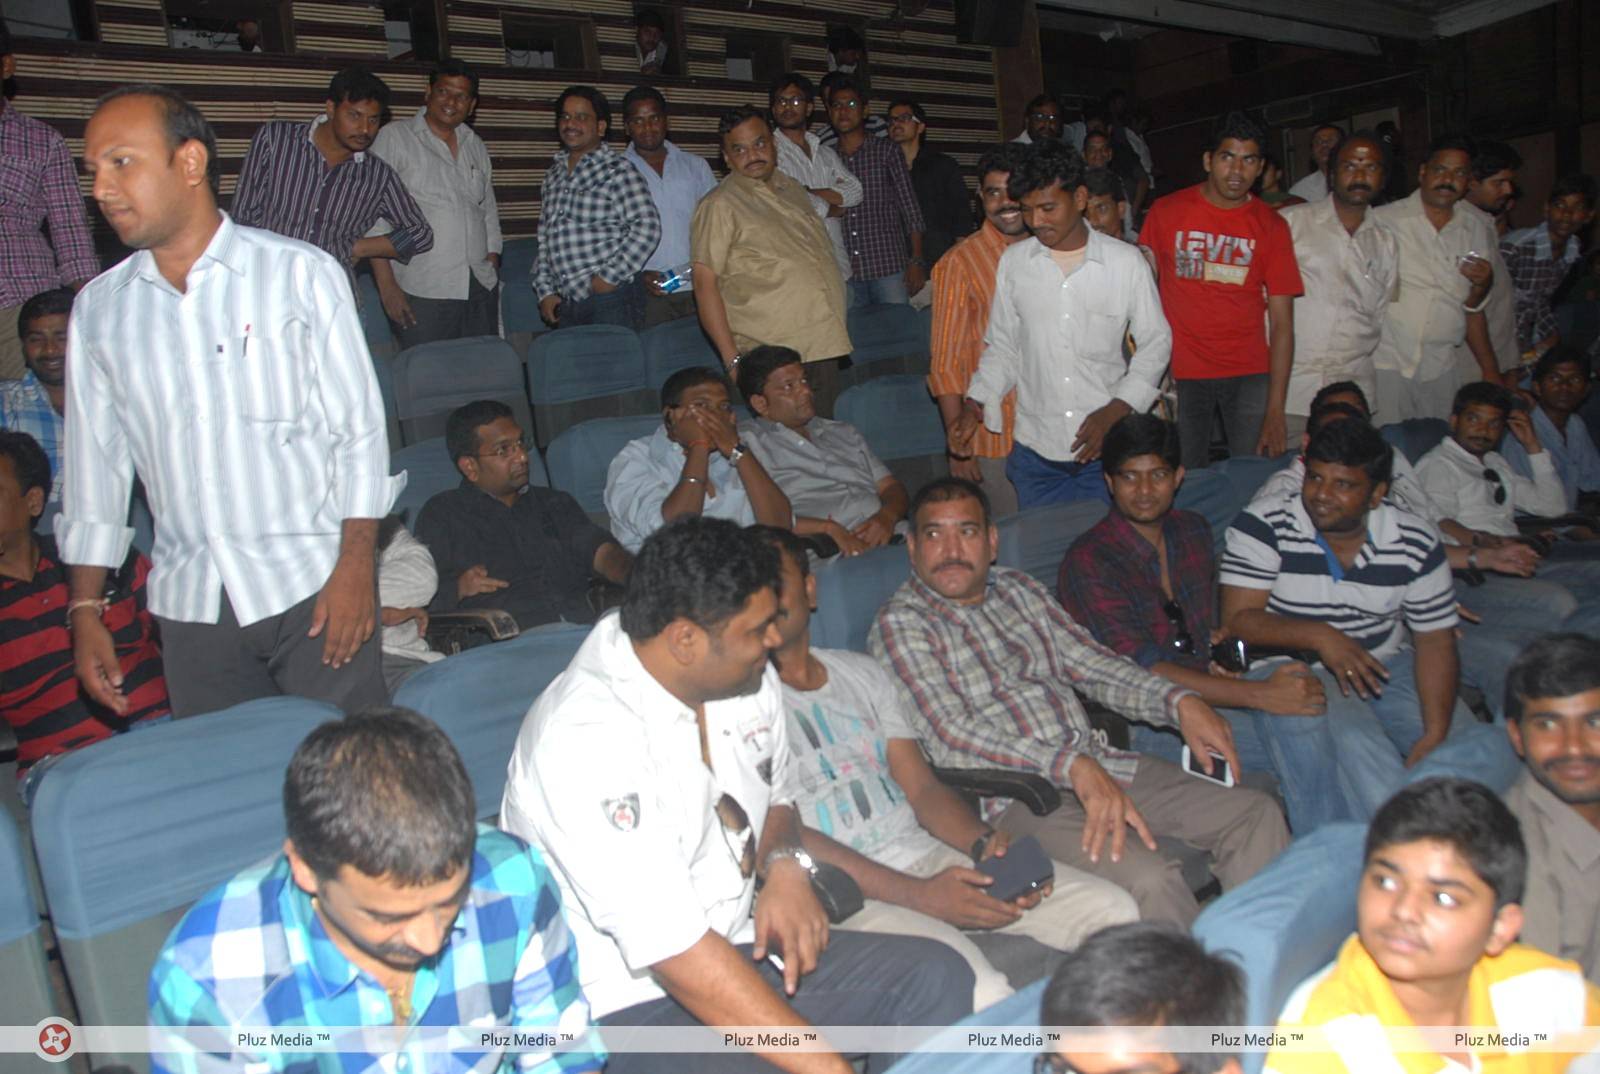 Baadshah Hungama at RTC X Roads Photos | Picture 425538